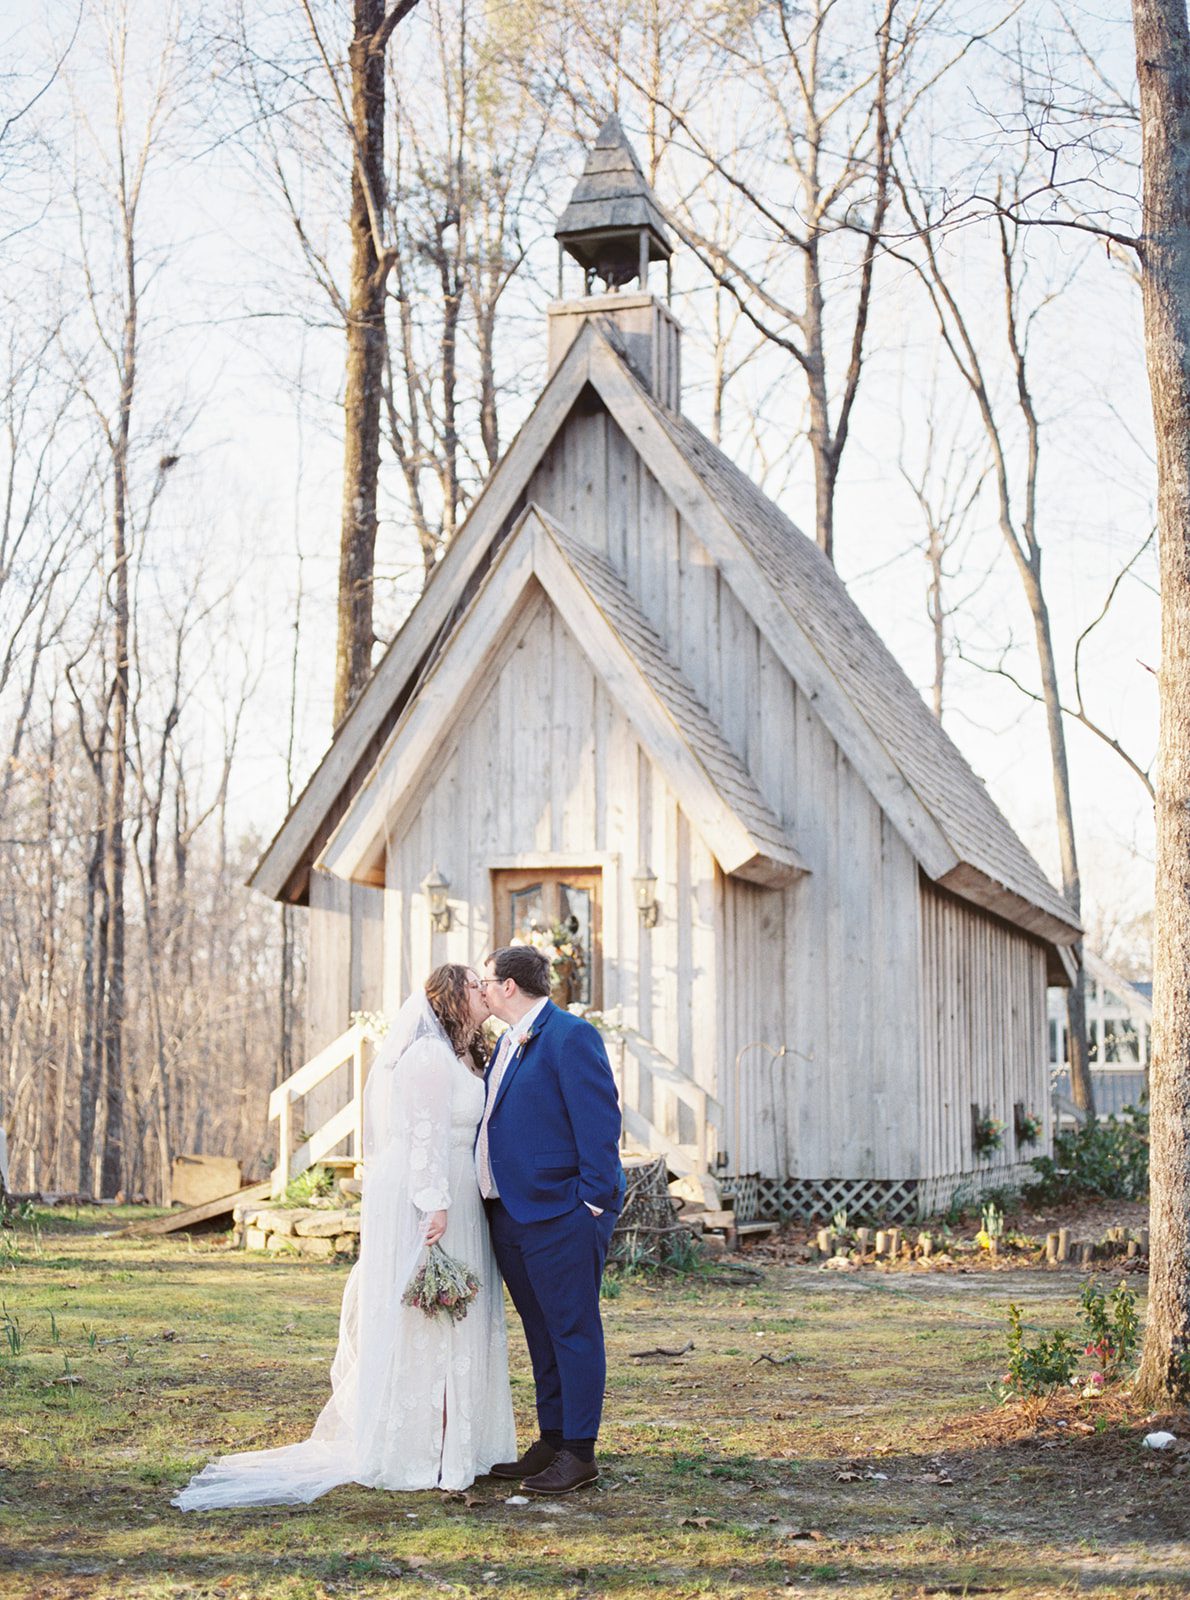 The bride and groom stand in front of the chapel at Fernwood of Mentone in Northeast Alabama during winter